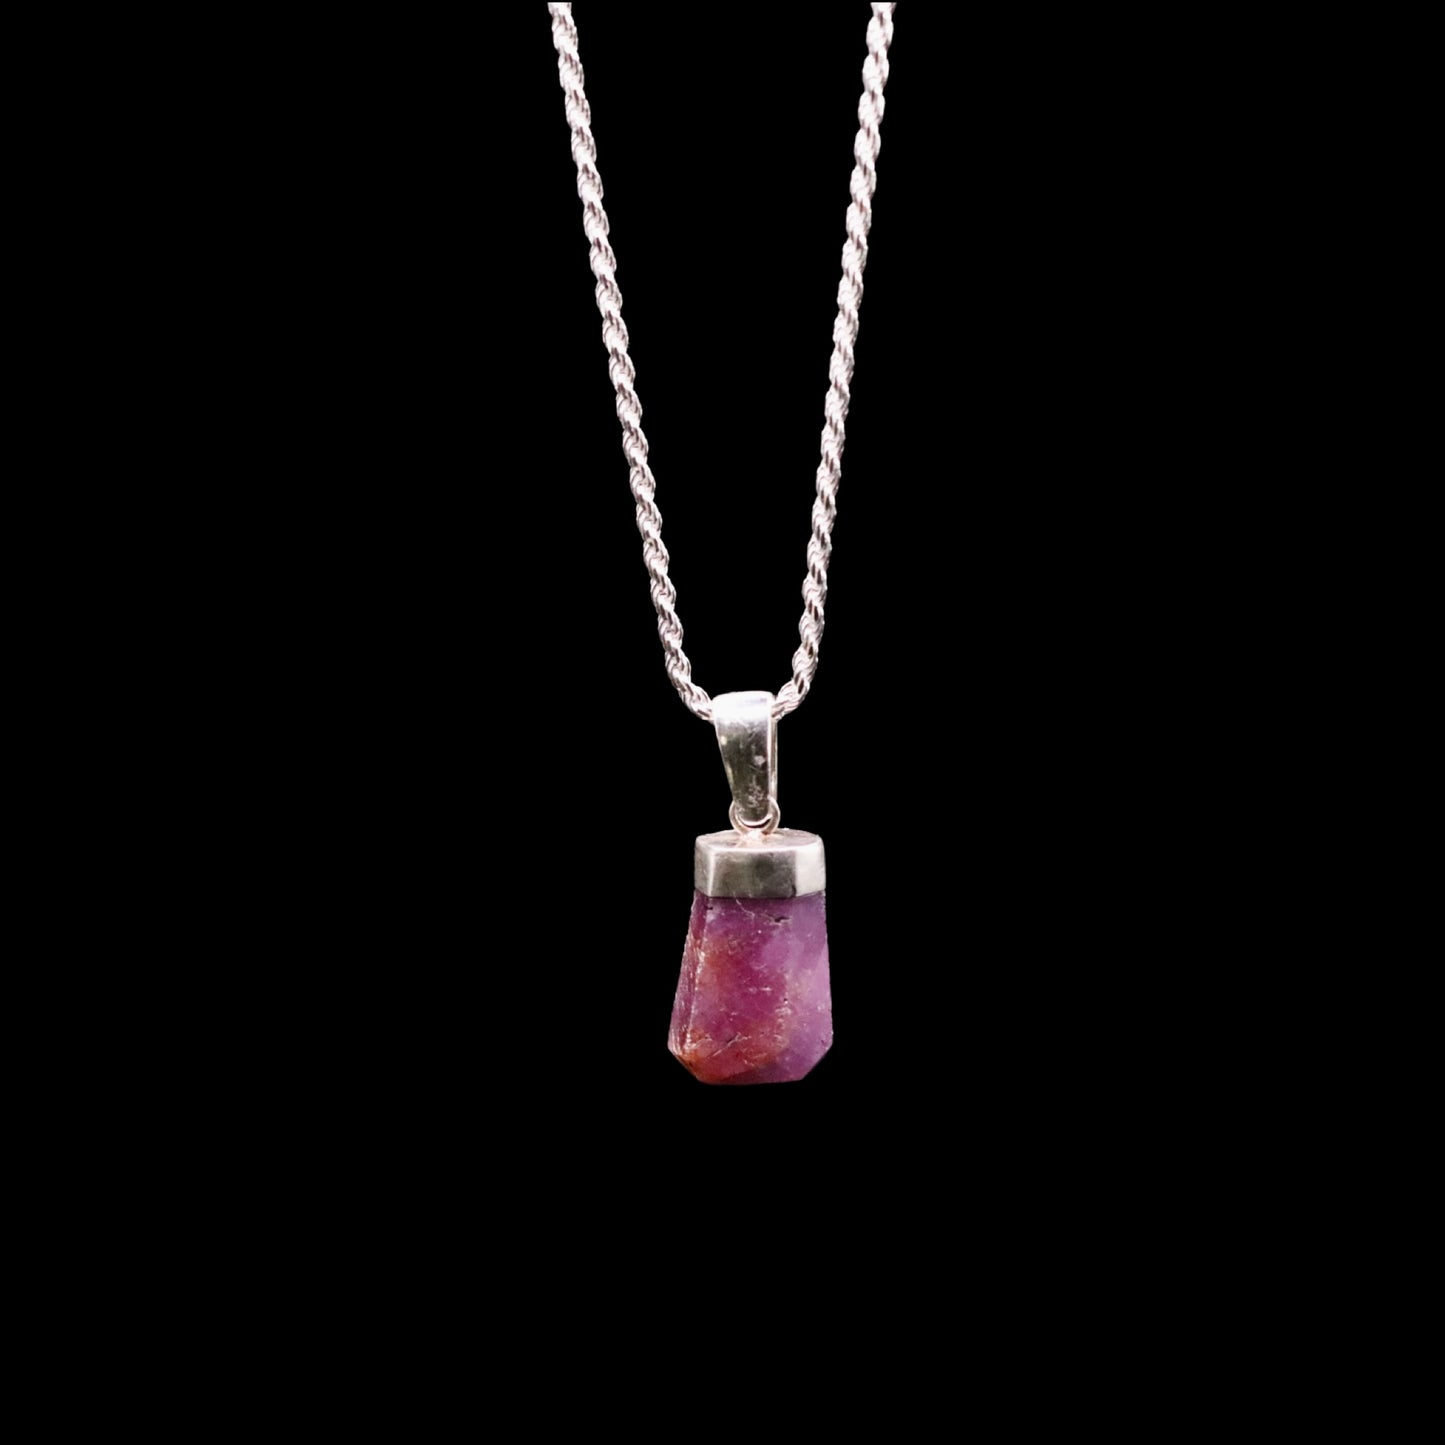 Raw Petite Ruby on Rope